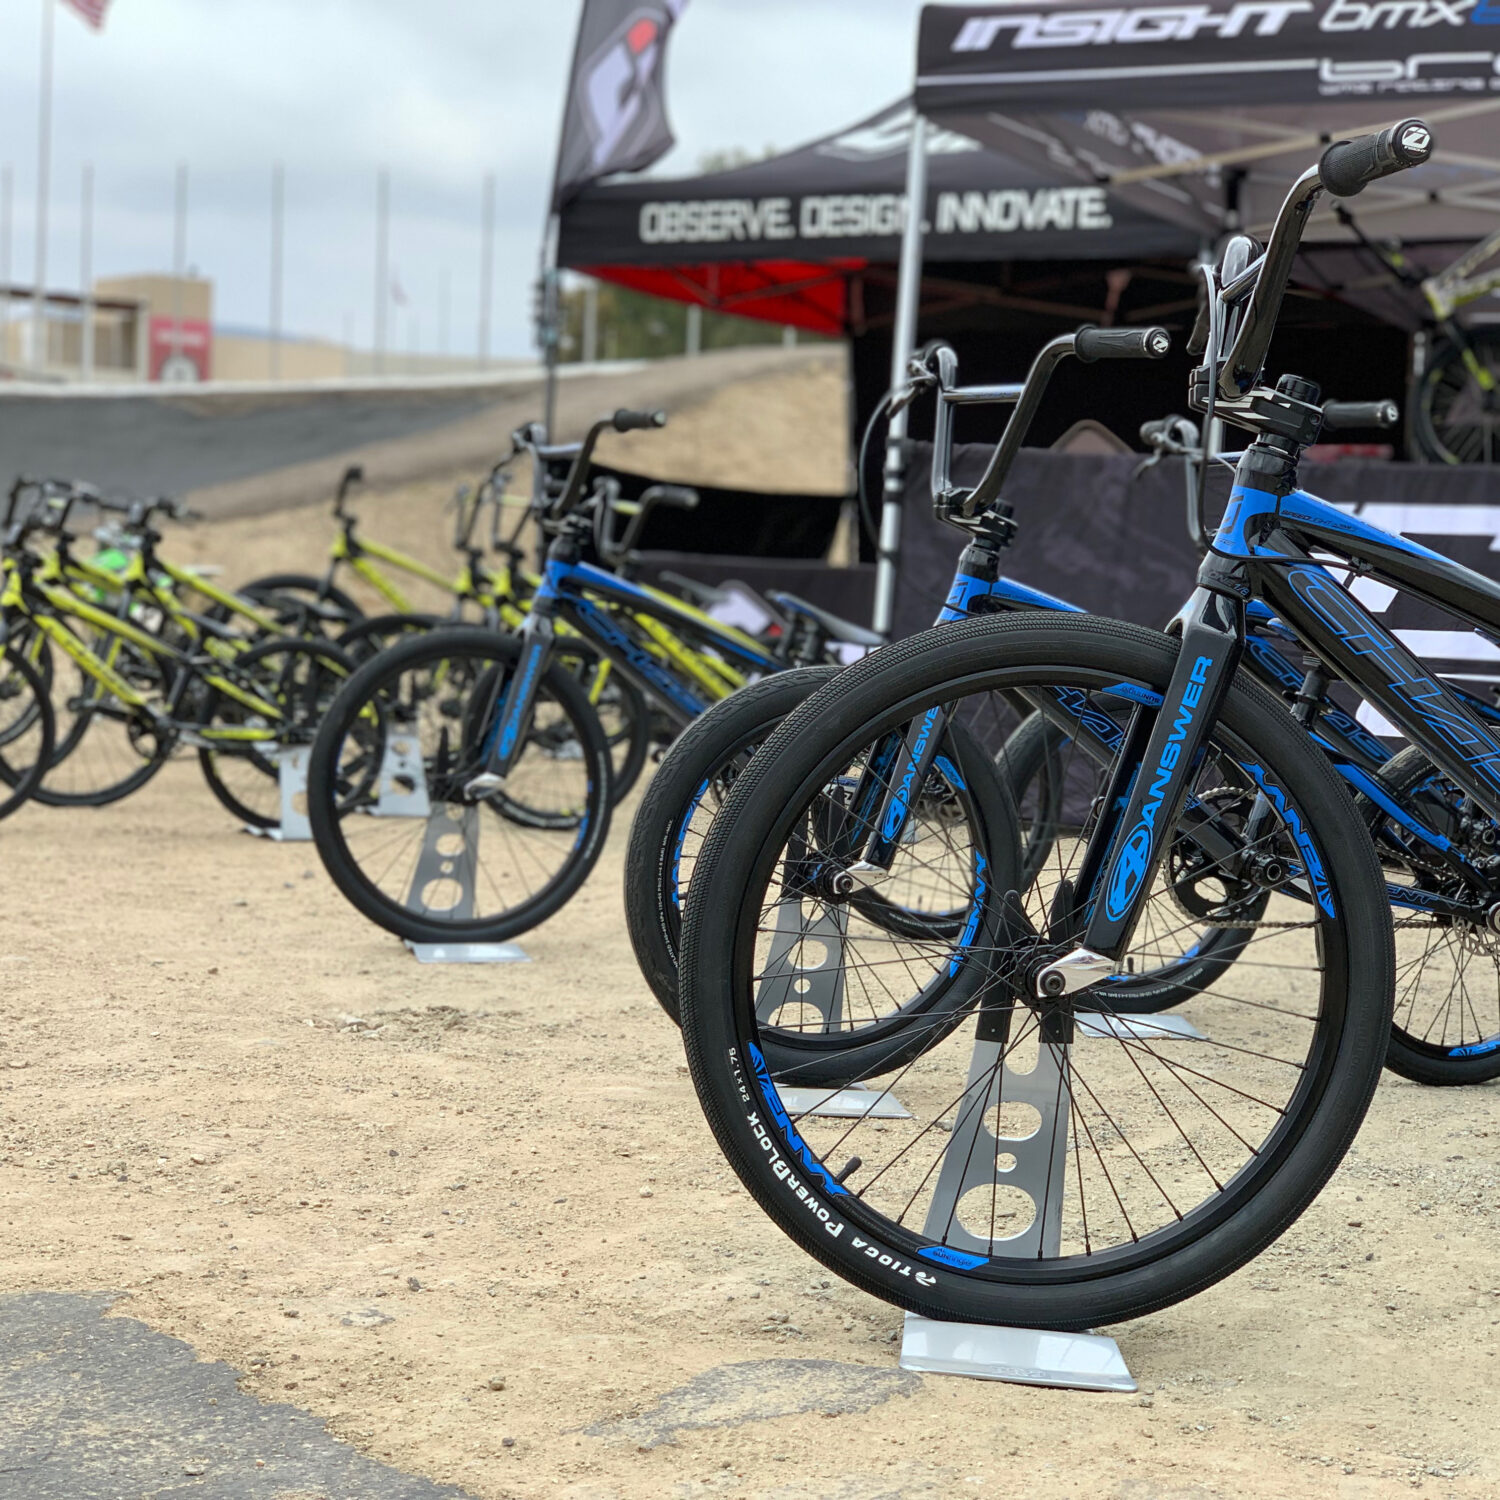 We are excited to introduce and present the 2020 Chase BMX Complete Element and Edge bikes. Connor Fields and Joris Daudet show you the new lines of bikes from the USA BMX Olympic Training center in Chula Vista, CA. The 2020 Chase Element and Edge bikes arrive this summer and ship out on or before August 1st.